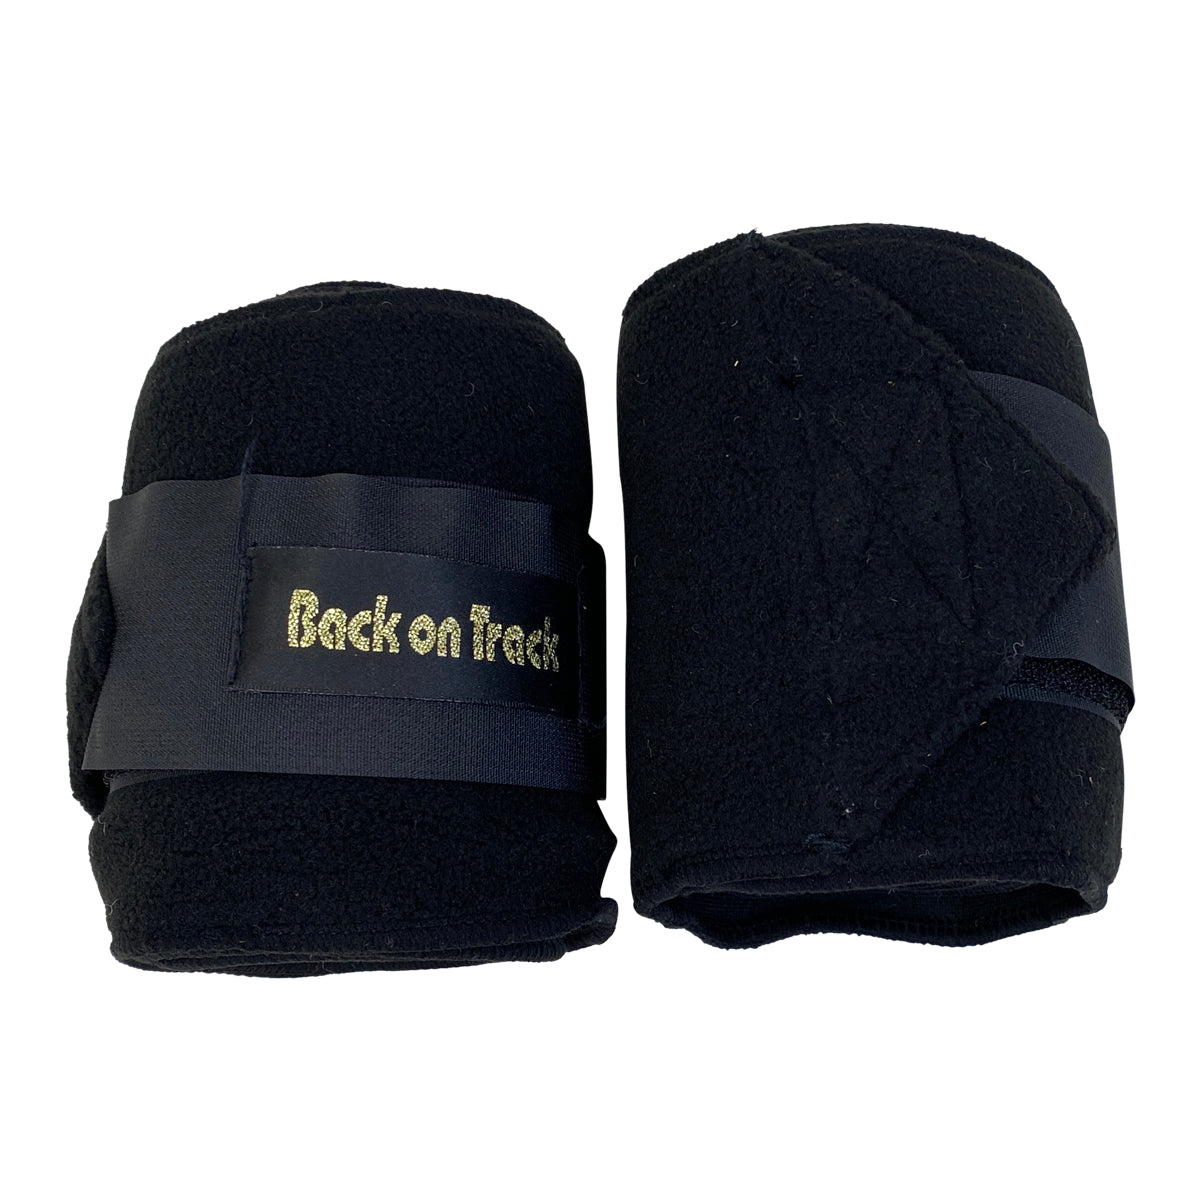 Back on Track Therapeutic Polo Wraps in Black